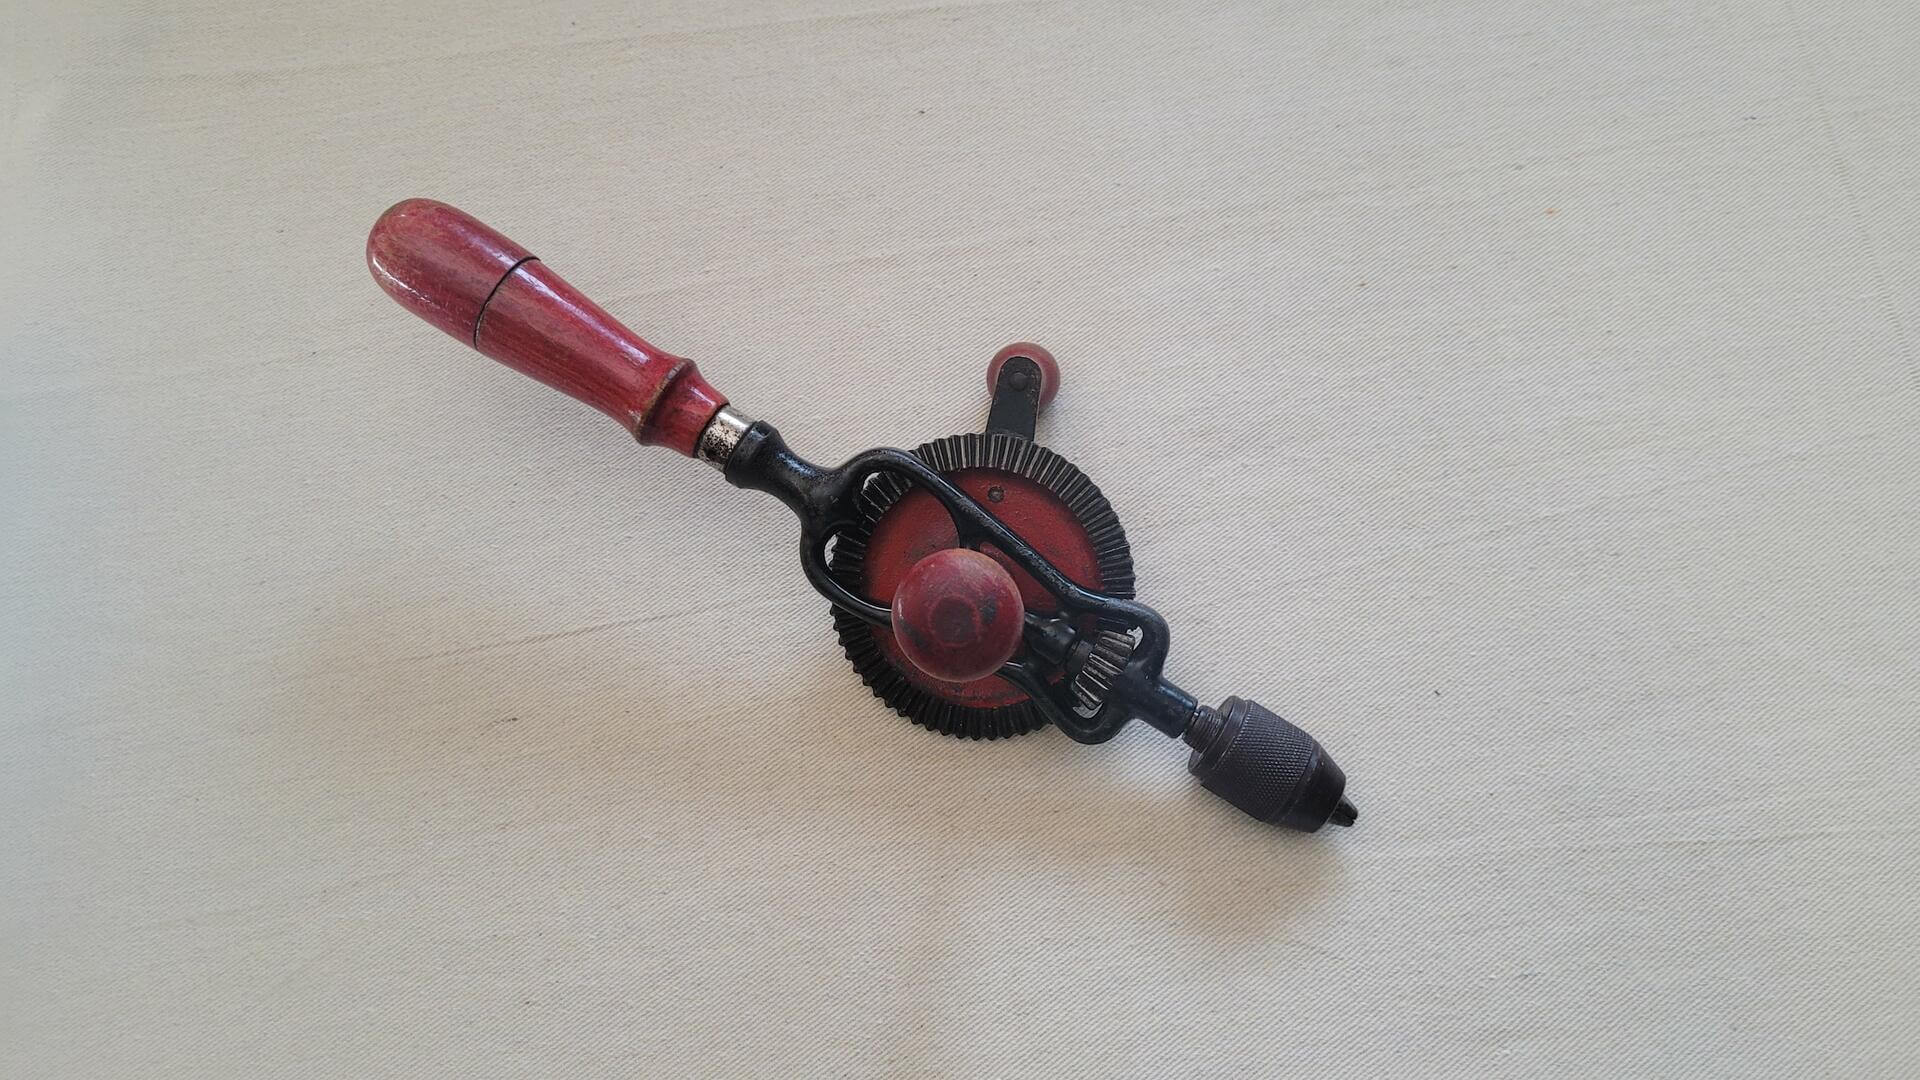 hoppe-carpenter-hand-eggbeater-drill-red-wooden-handle-vintage-antique-made-in-germany-woodworking-tools